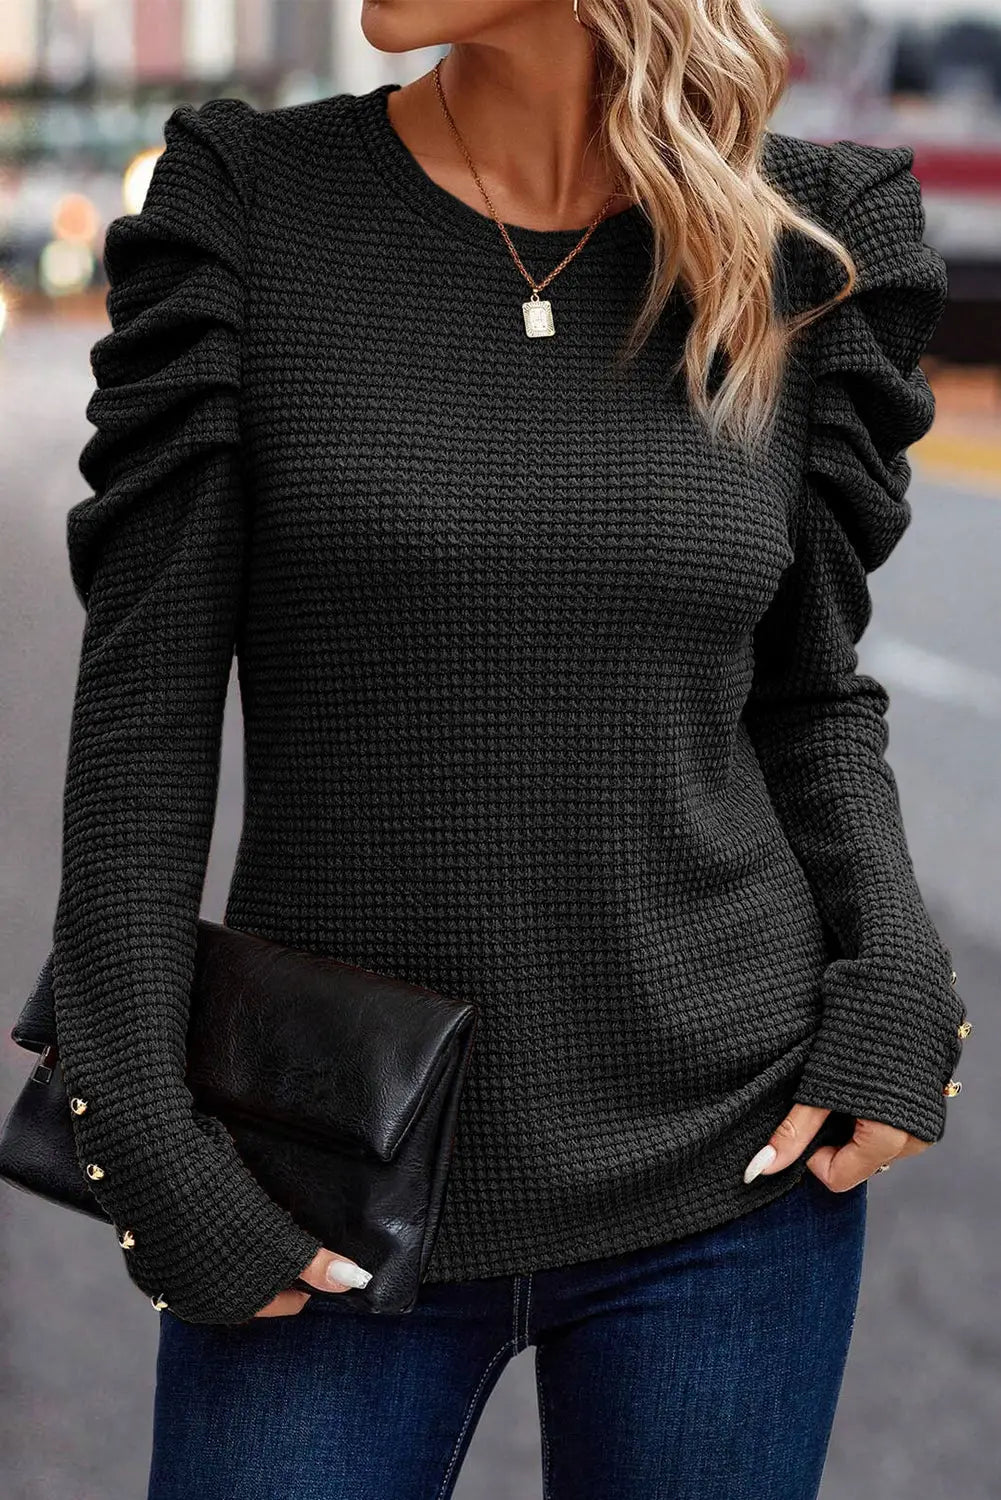 Black solid color textured buttoned gigot sleeve top - long tops